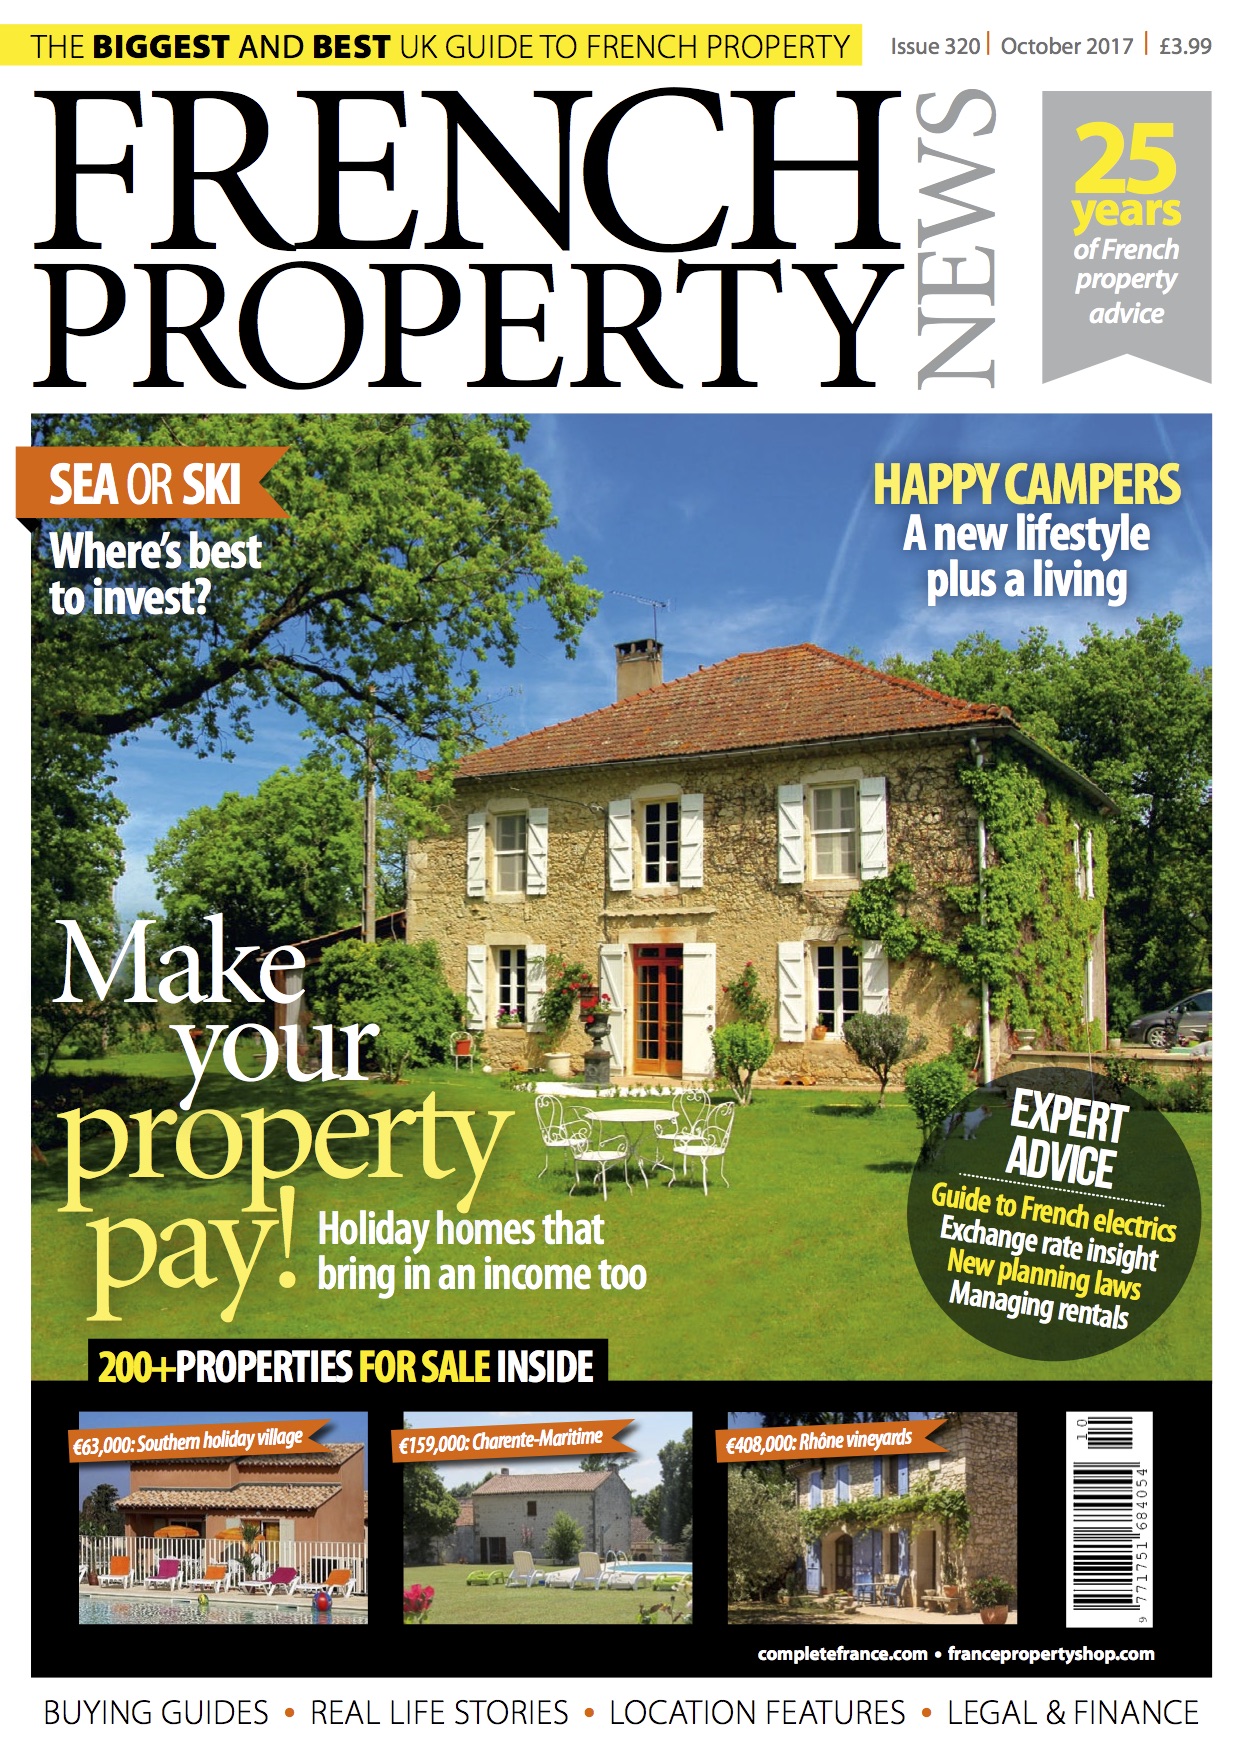 French Property News – Making your holiday home pay